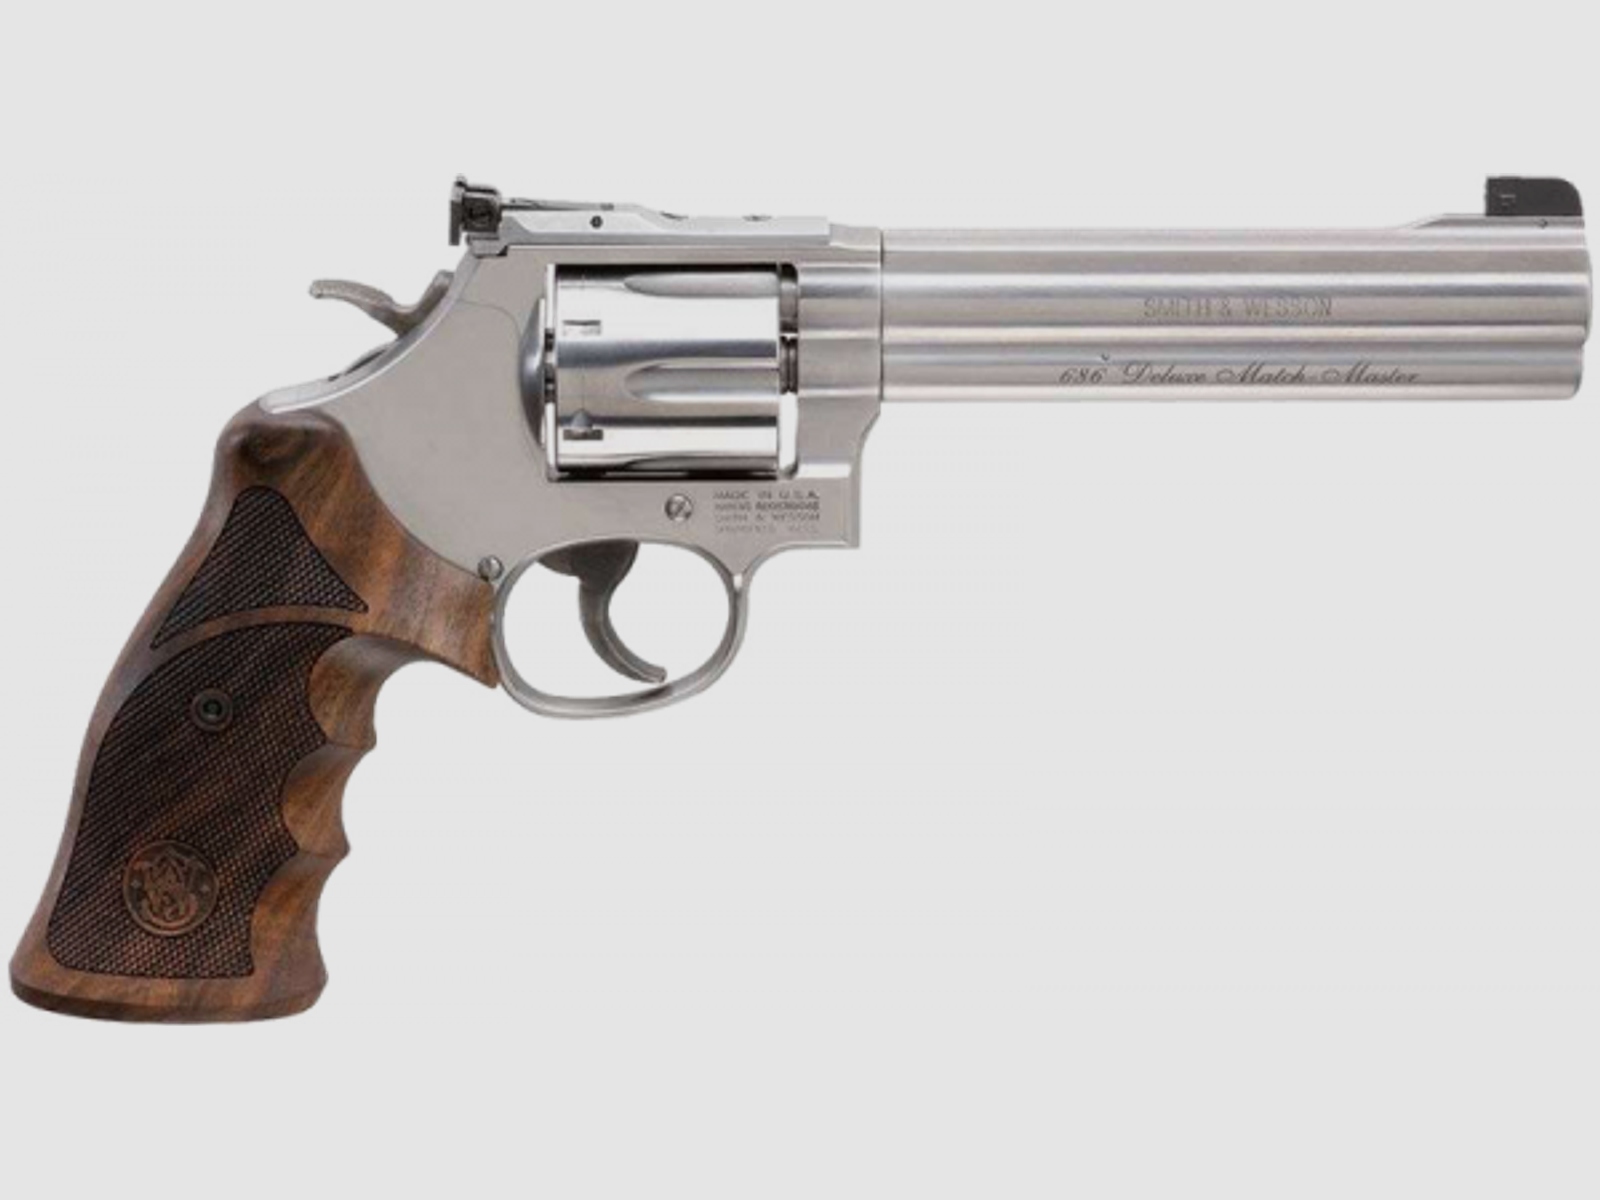 Smith & Wesson Model 686 Target Champion DeLuxe Match Master Revolver